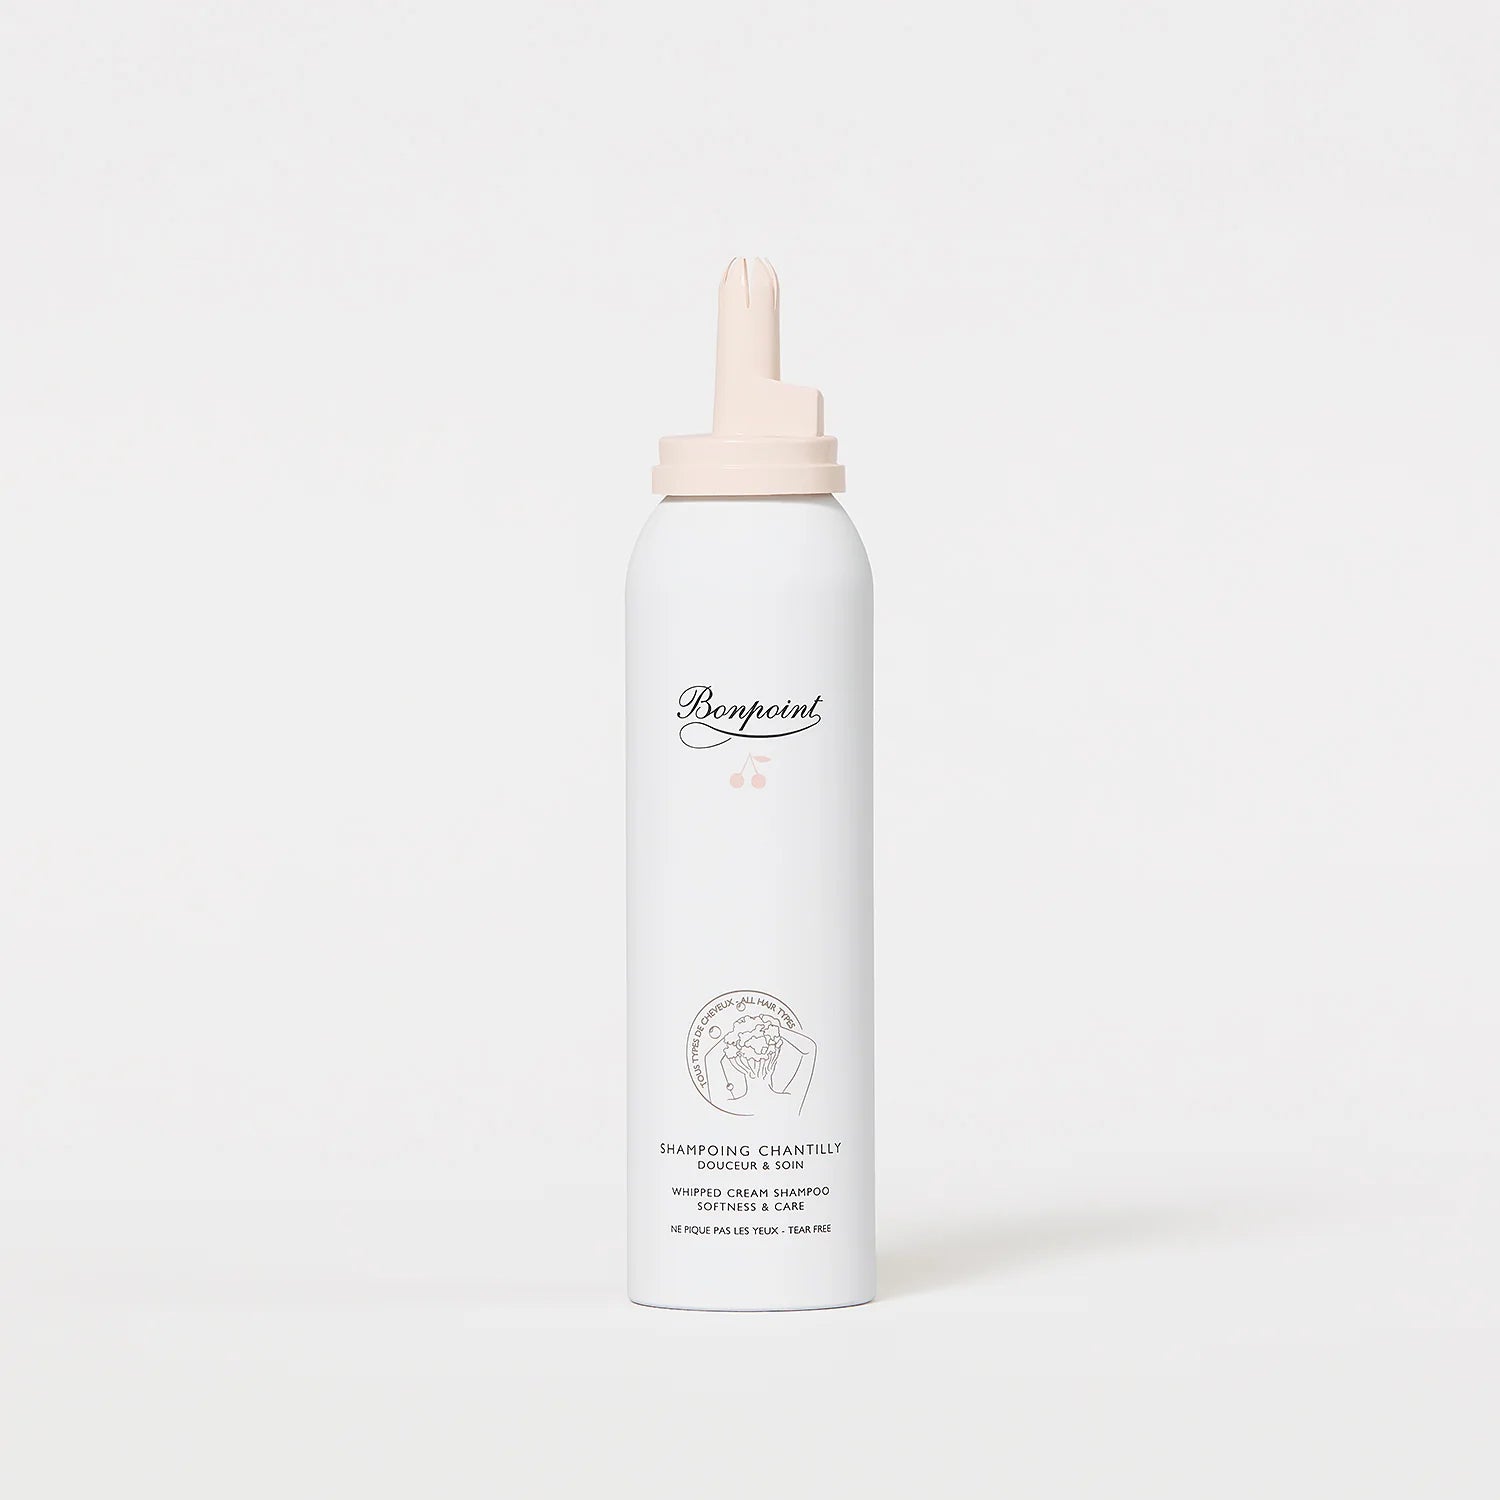 Shampoing Chantilly 150 ml